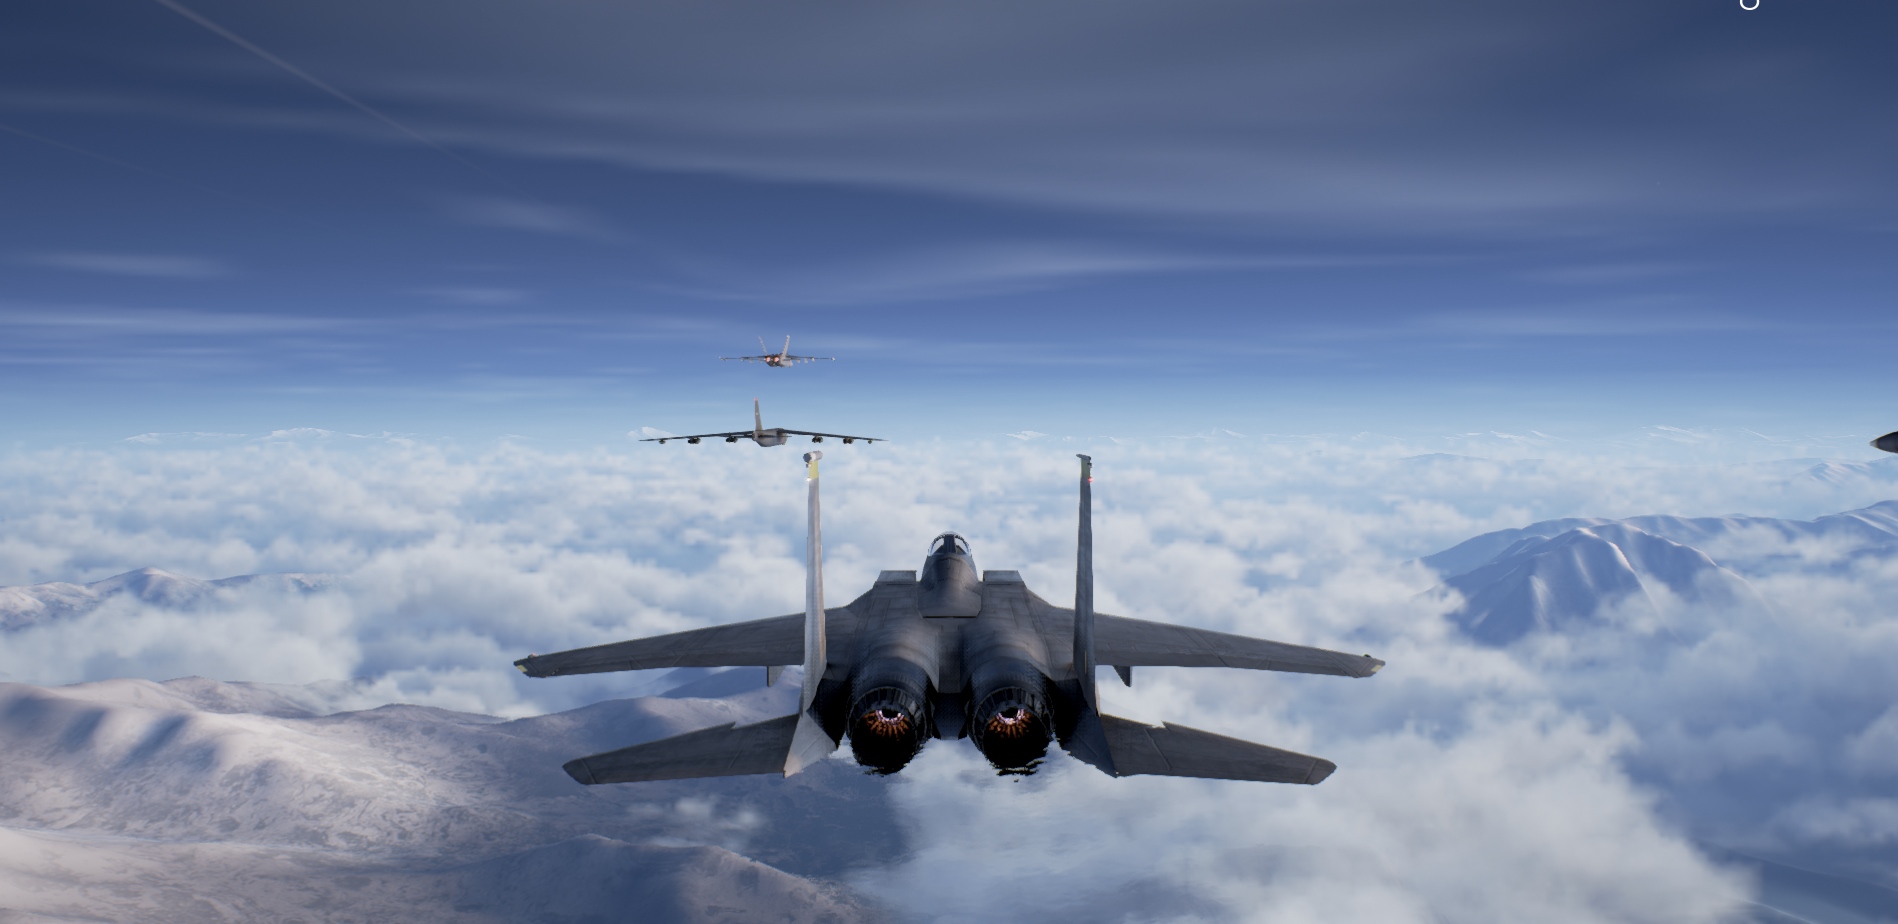 project wingman ps4 download free